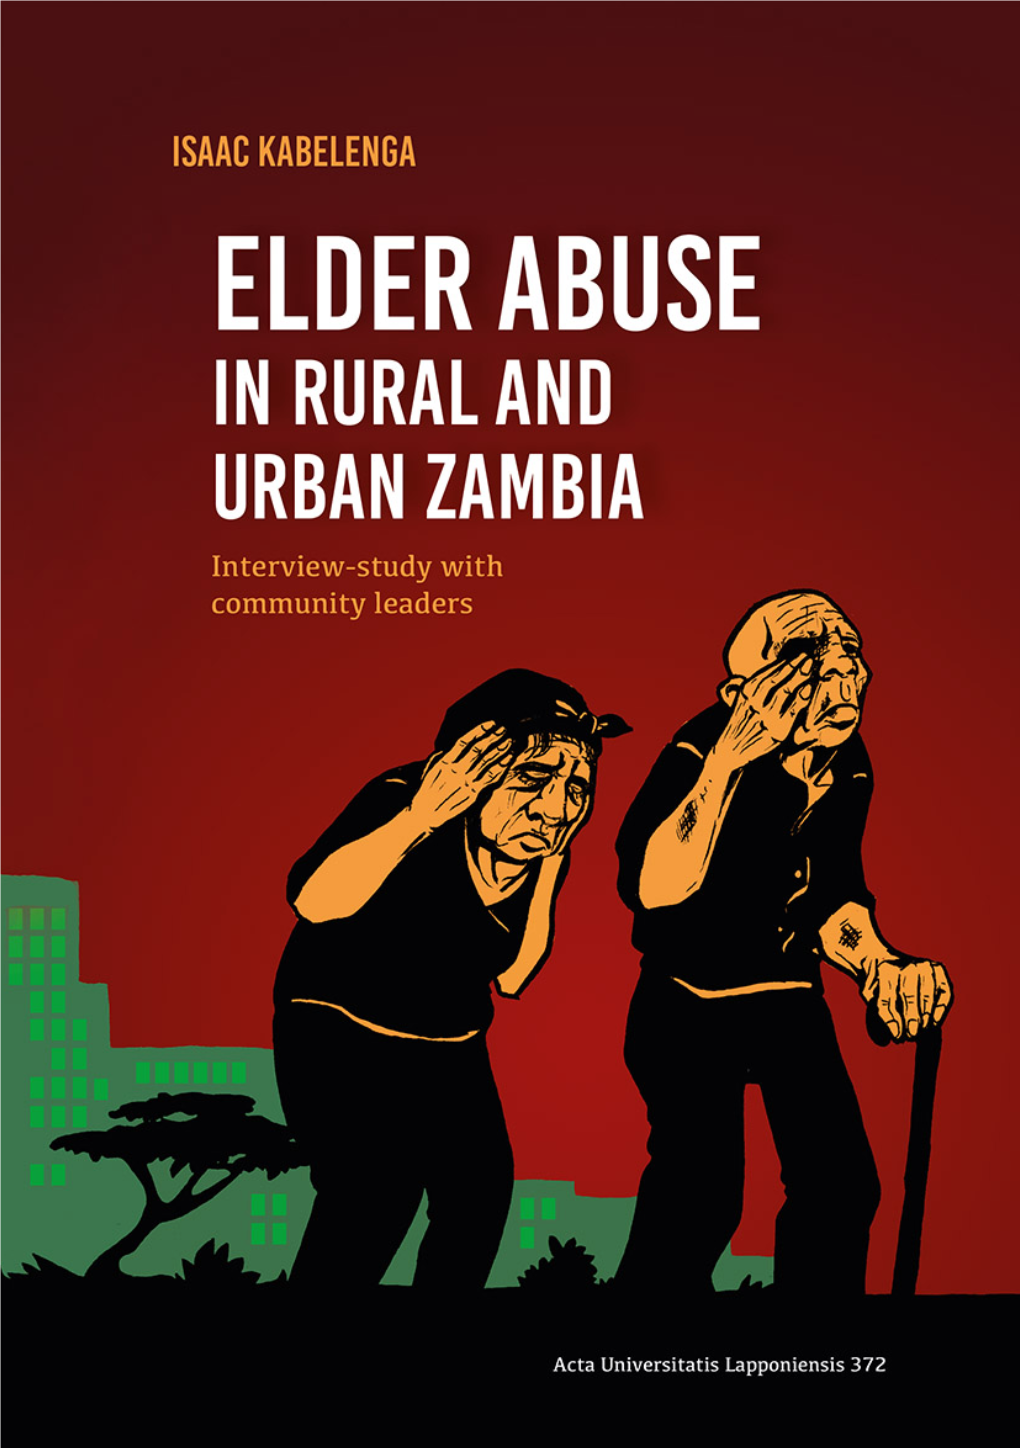 Elder Abuse in Rural and Urban Zambia Abstract